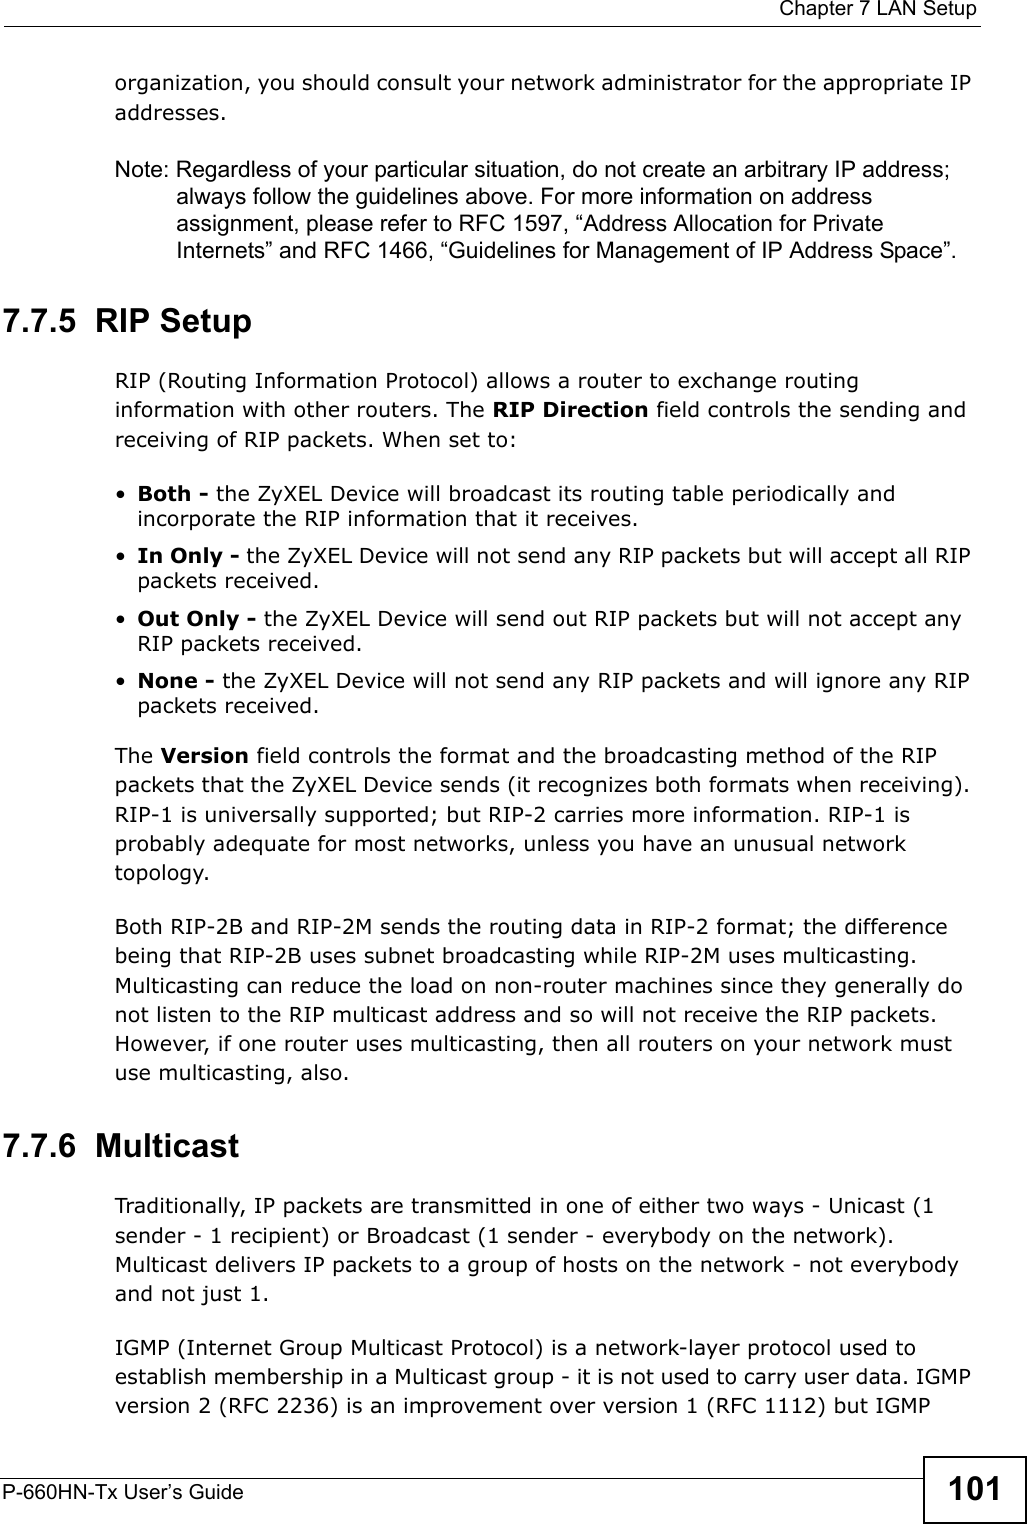  Chapter 7 LAN SetupP-660HN-Tx User’s Guide 101organization, you should consult your network administrator for the appropriate IP addresses.Note: Regardless of your particular situation, do not create an arbitrary IP address; always follow the guidelines above. For more information on address assignment, please refer to RFC 1597, “Address Allocation for Private Internets” and RFC 1466, “Guidelines for Management of IP Address Space”.7.7.5  RIP SetupRIP (Routing Information Protocol) allows a router to exchange routing information with other routers. The RIP Direction field controls the sending and receiving of RIP packets. When set to:•Both - the ZyXEL Device will broadcast its routing table periodically and incorporate the RIP information that it receives.•In Only - the ZyXEL Device will not send any RIP packets but will accept all RIP packets received.•Out Only - the ZyXEL Device will send out RIP packets but will not accept any RIP packets received.•None - the ZyXEL Device will not send any RIP packets and will ignore any RIP packets received.The Version field controls the format and the broadcasting method of the RIP packets that the ZyXEL Device sends (it recognizes both formats when receiving). RIP-1 is universally supported; but RIP-2 carries more information. RIP-1 is probably adequate for most networks, unless you have an unusual network topology.Both RIP-2B and RIP-2M sends the routing data in RIP-2 format; the difference being that RIP-2B uses subnet broadcasting while RIP-2M uses multicasting.   Multicasting can reduce the load on non-router machines since they generally do not listen to the RIP multicast address and so will not receive the RIP packets. However, if one router uses multicasting, then all routers on your network must use multicasting, also. 7.7.6  MulticastTraditionally, IP packets are transmitted in one of either two ways - Unicast (1 sender - 1 recipient) or Broadcast (1 sender - everybody on the network). Multicast delivers IP packets to a group of hosts on the network - not everybody and not just 1. IGMP (Internet Group Multicast Protocol) is a network-layer protocol used to establish membership in a Multicast group - it is not used to carry user data. IGMP version 2 (RFC 2236) is an improvement over version 1 (RFC 1112) but IGMP 